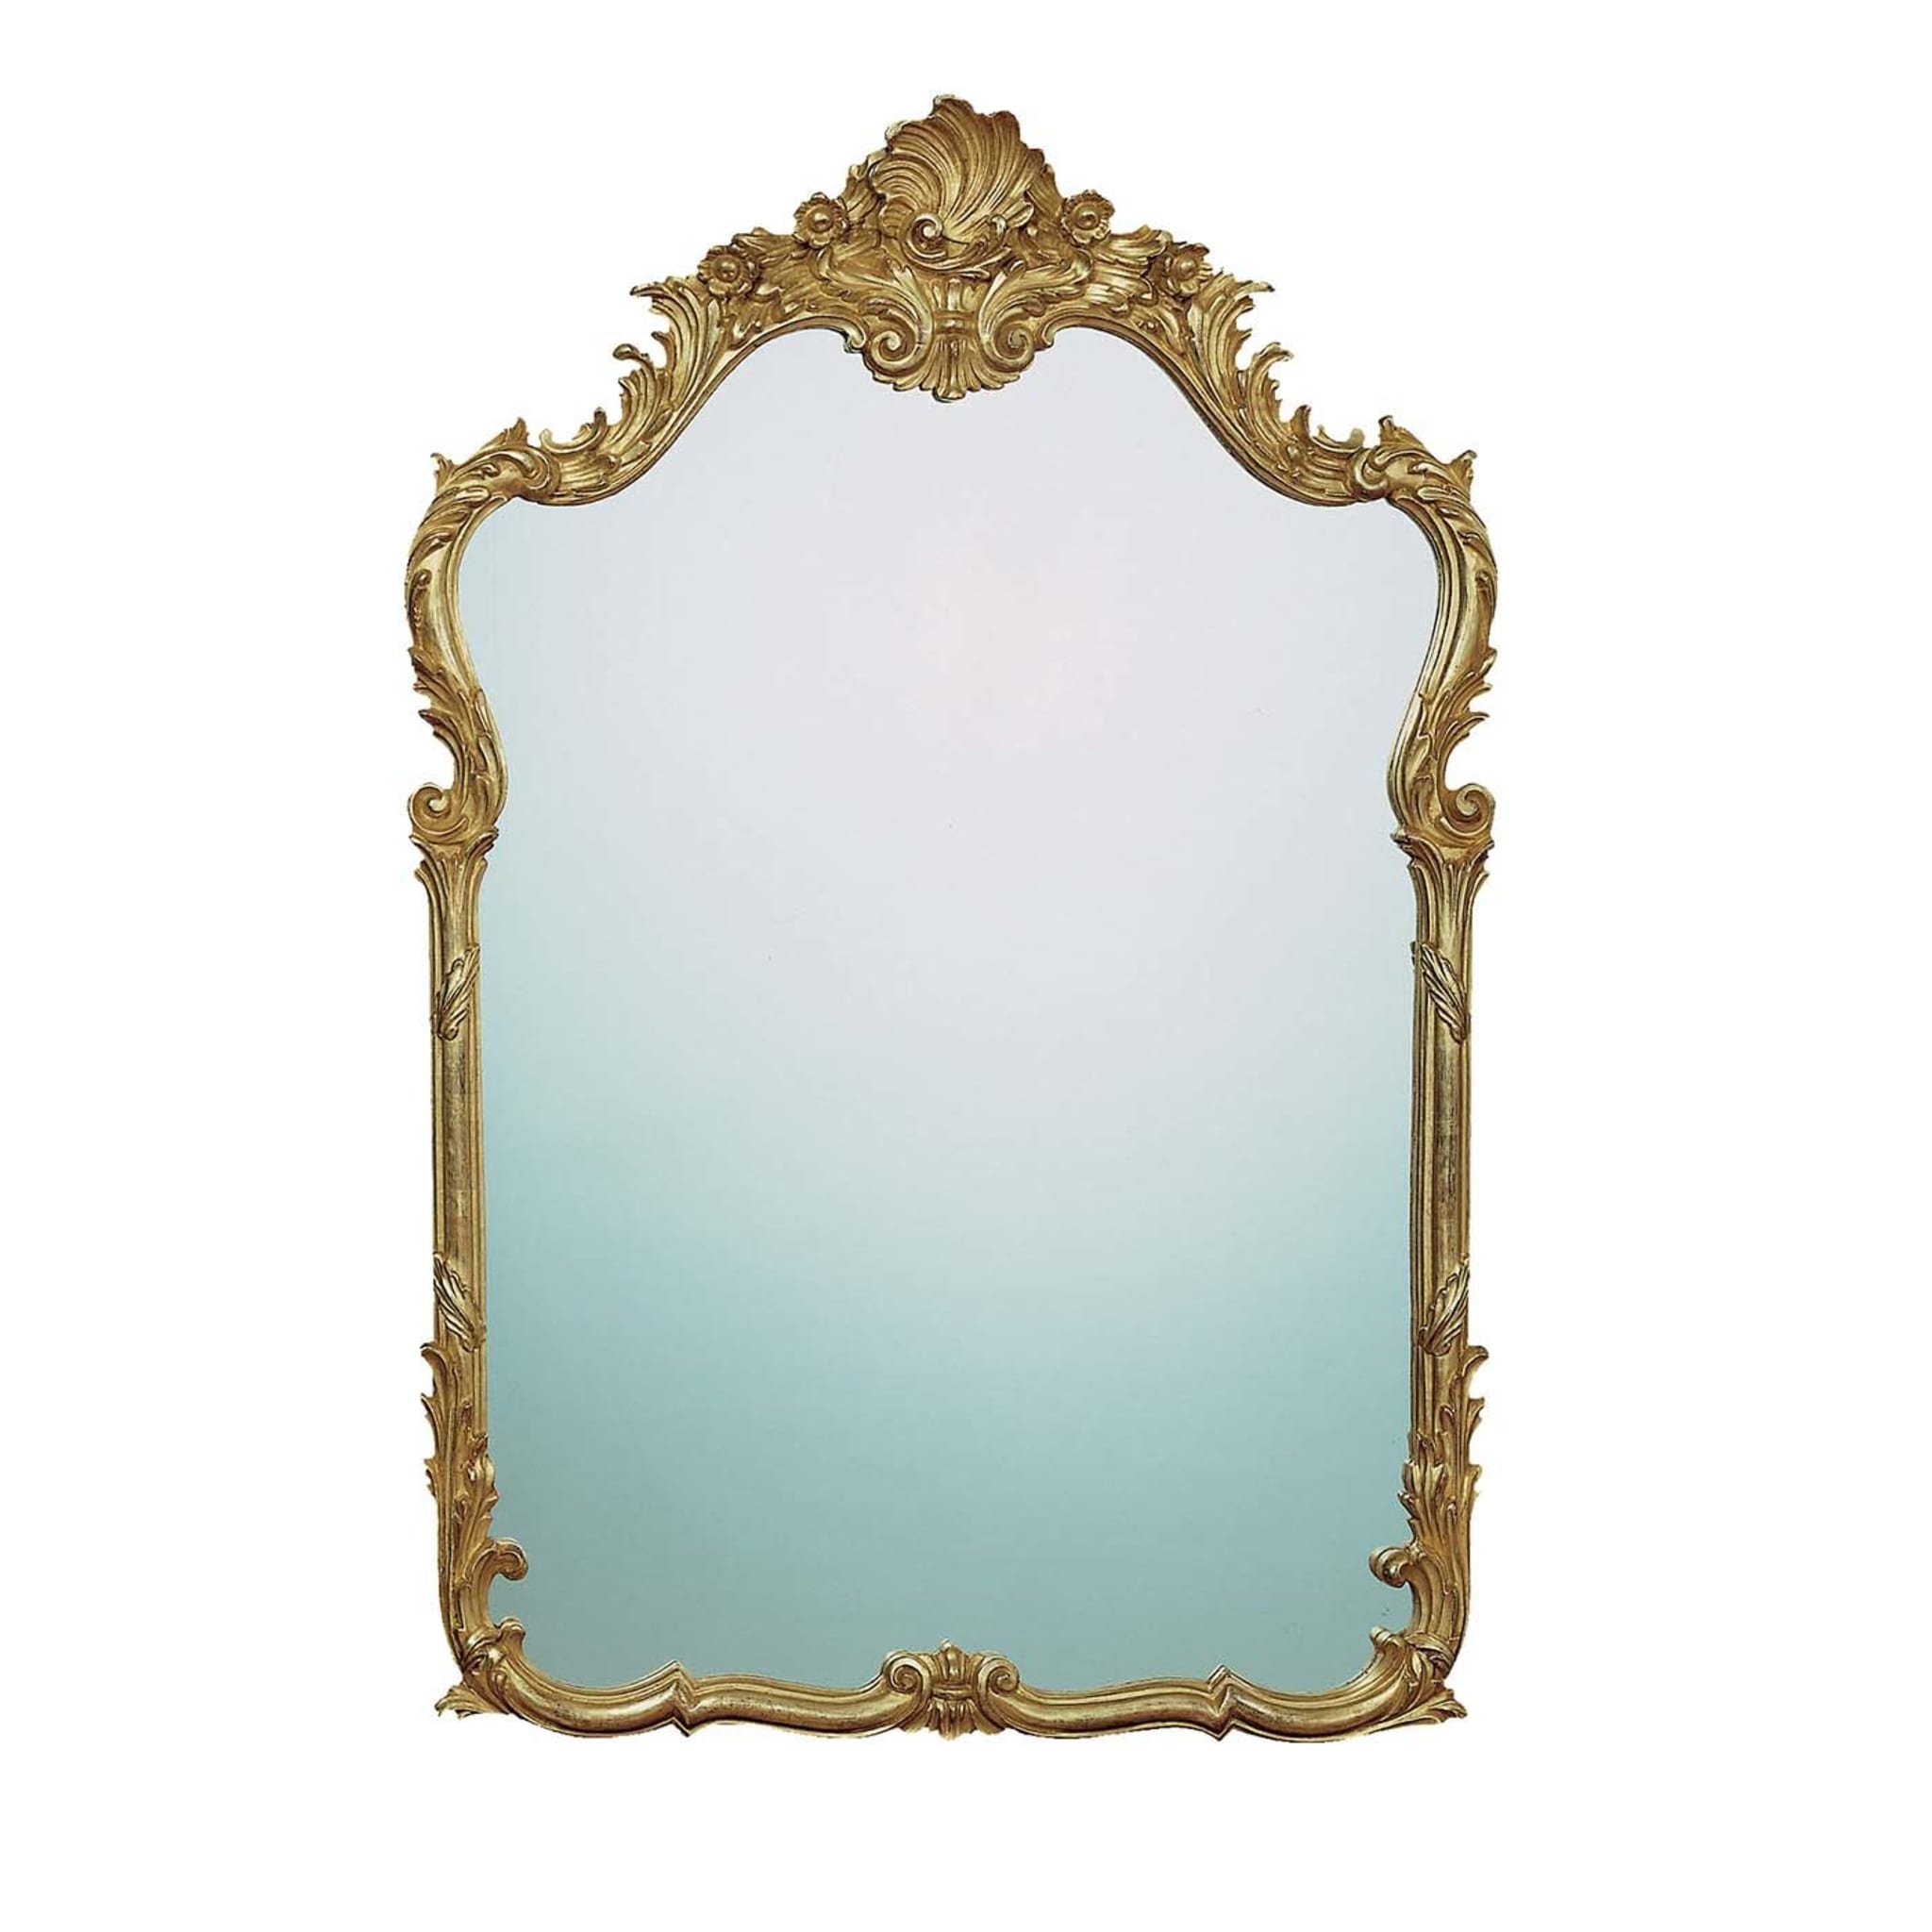 FRENCH GOLD WALL MIRROR